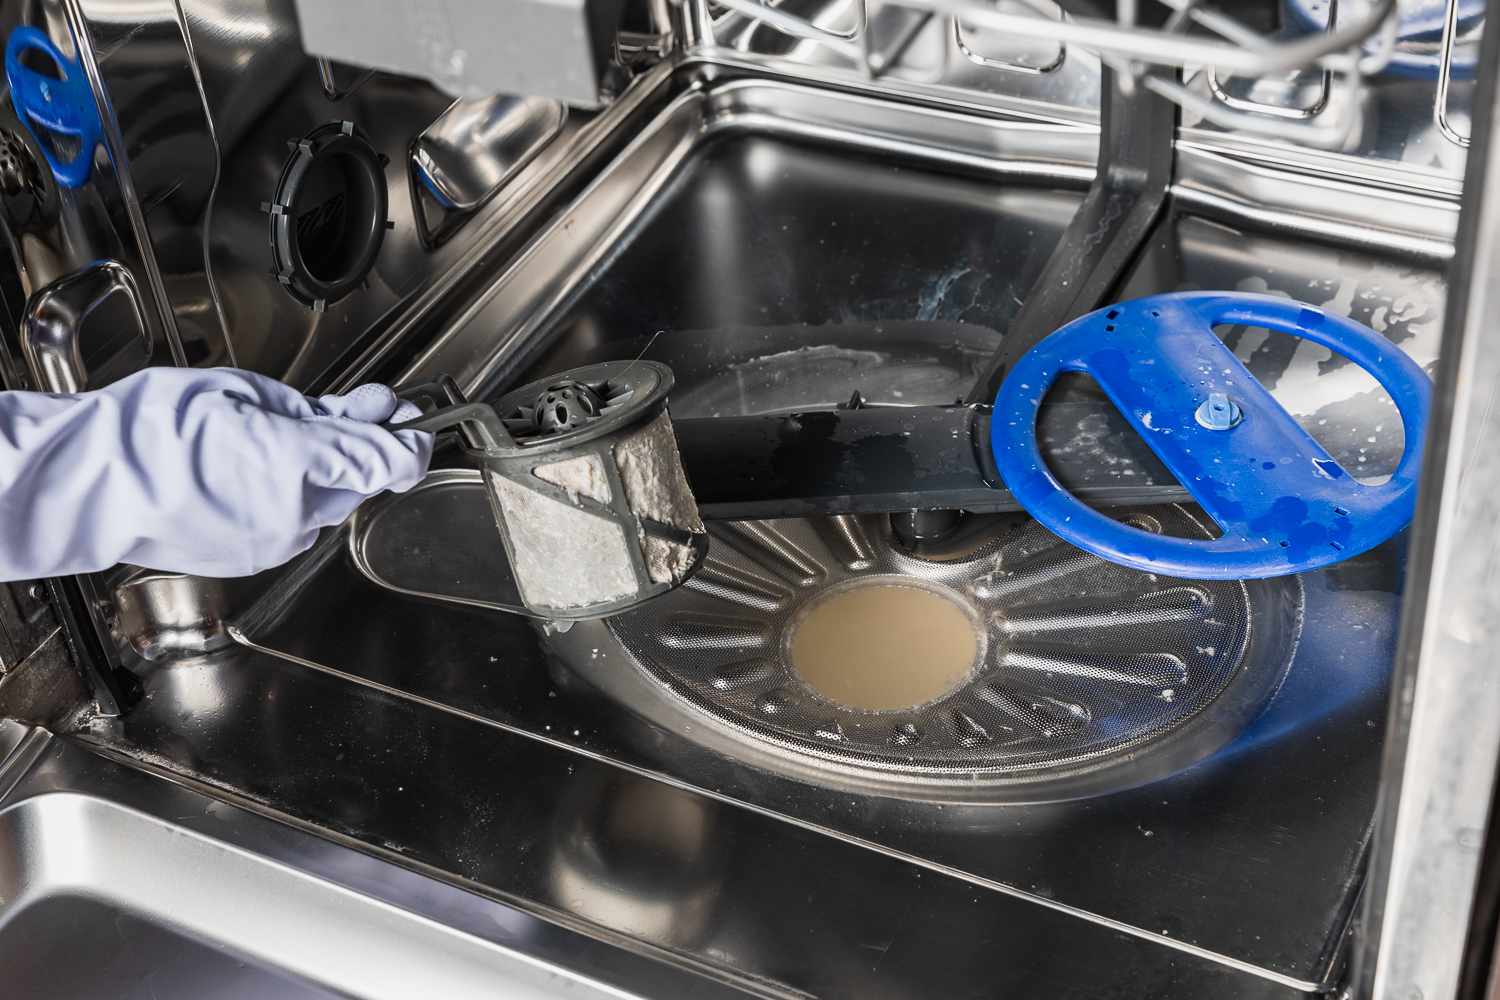 How to Unclog a Dishwasher Drain in 5 Steps